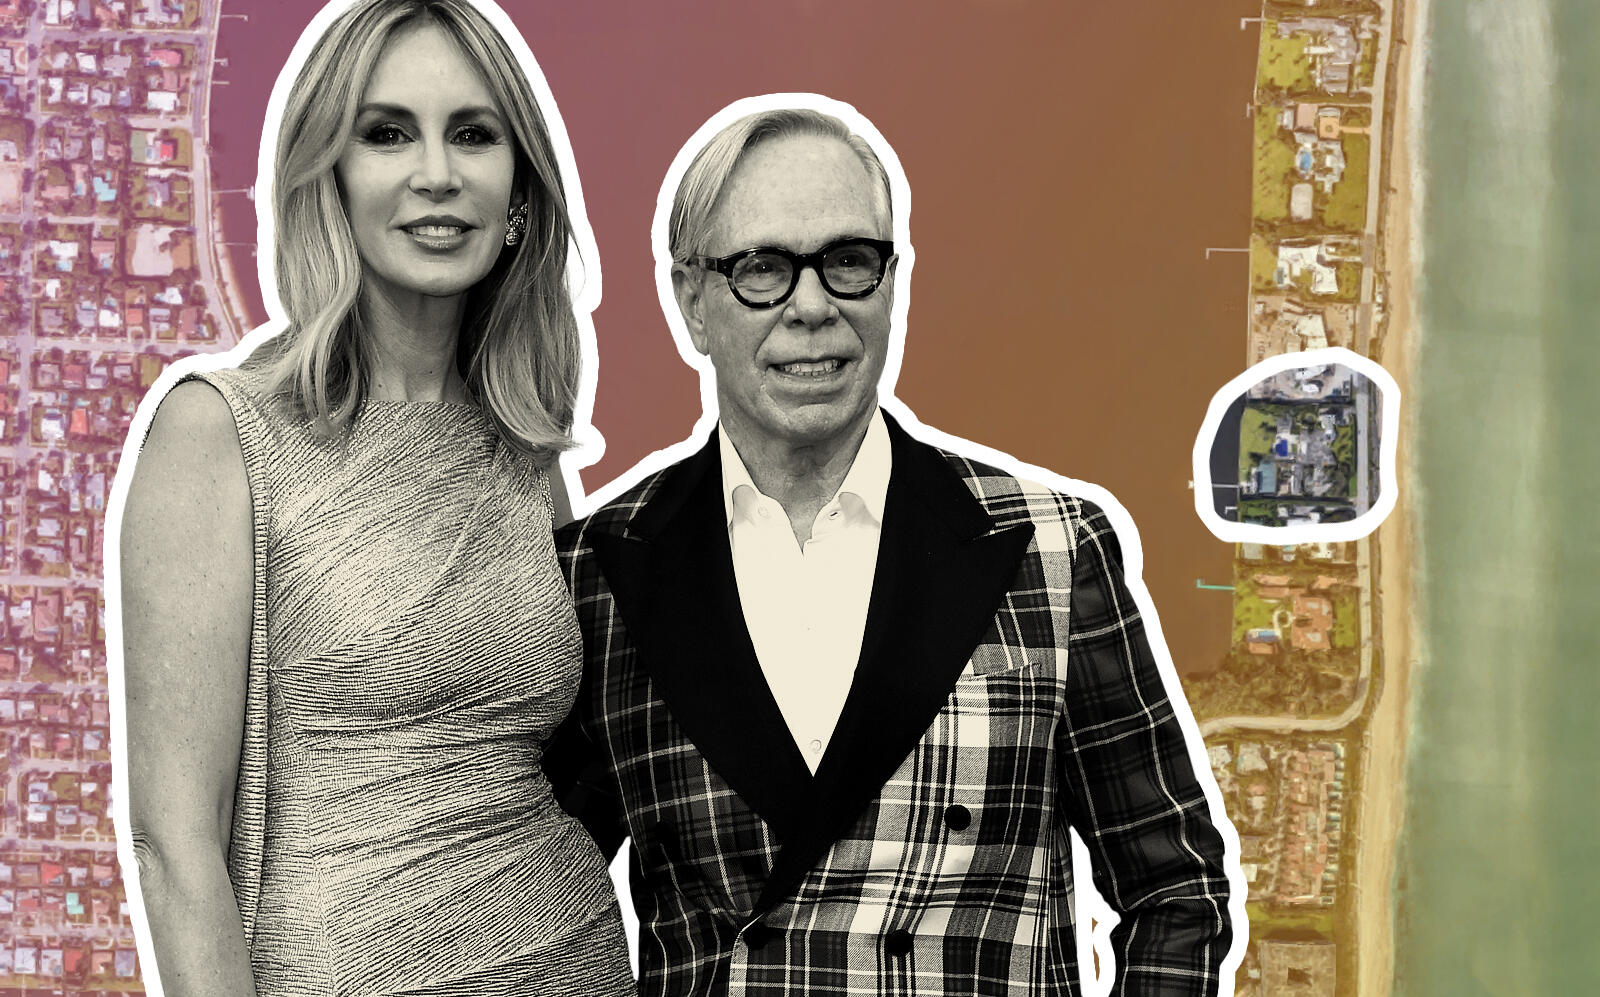 Tommy Hilfiger and his wife Dee Ocleppo Hilfiger with the Palm Beach location (Google Maps, Getty)